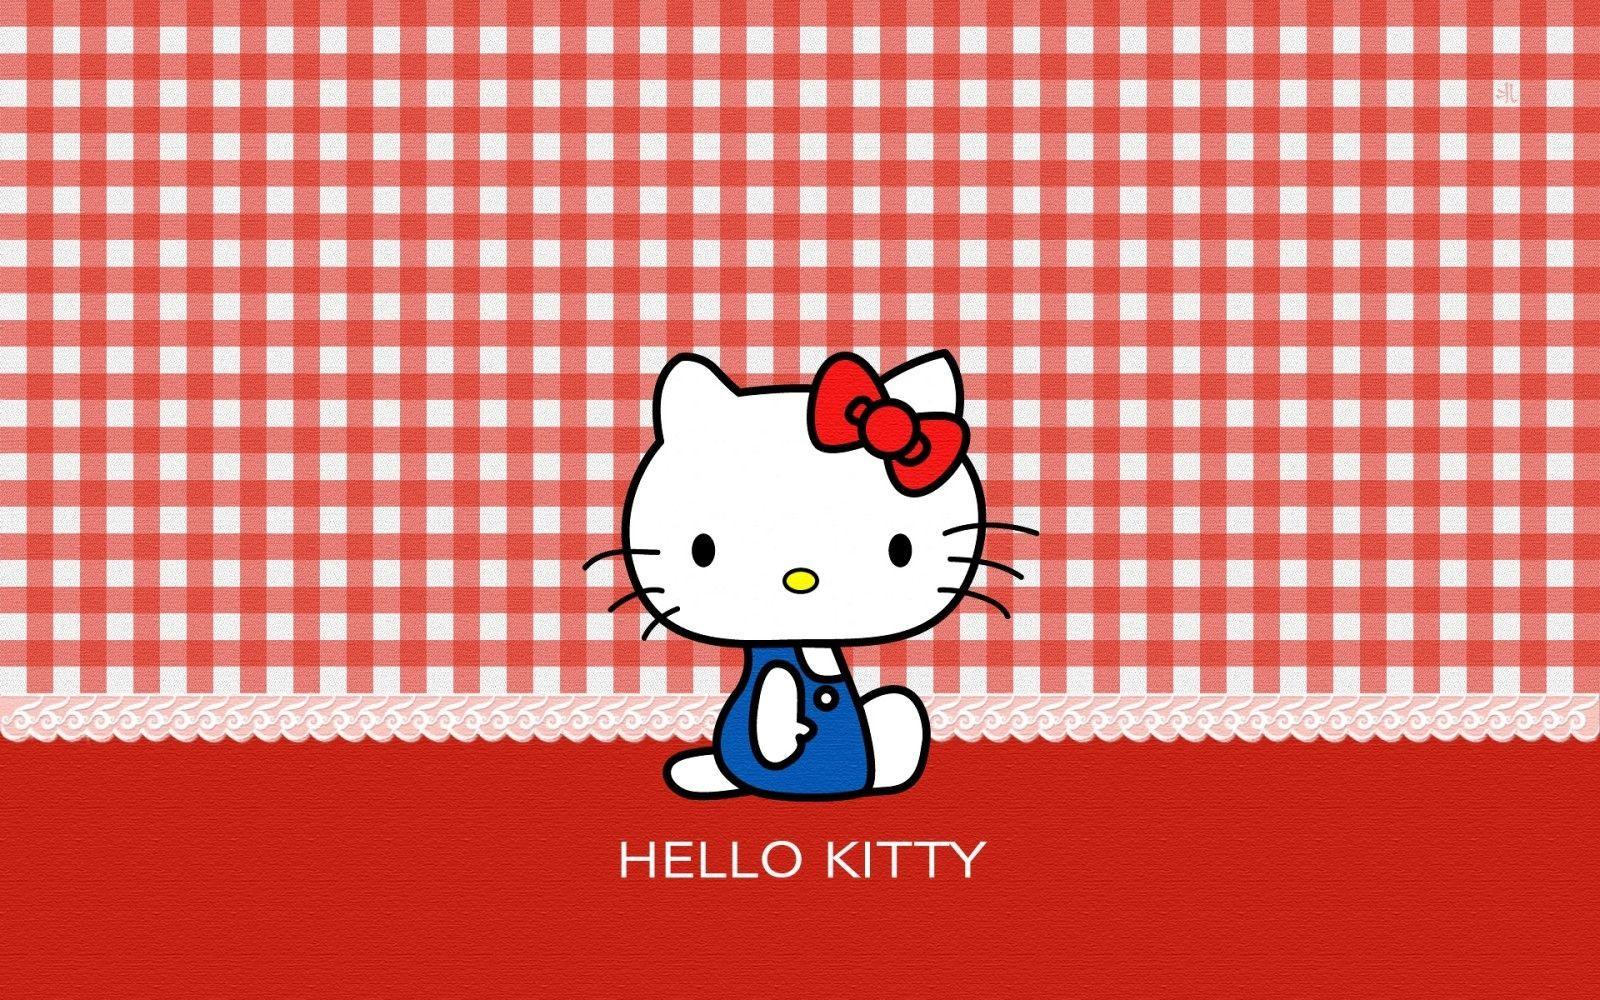 20 Cute Hello Kitty Wallpaper Ideas  Red Dot Background  Idea Wallpapers   iPhone WallpapersColor Schemes